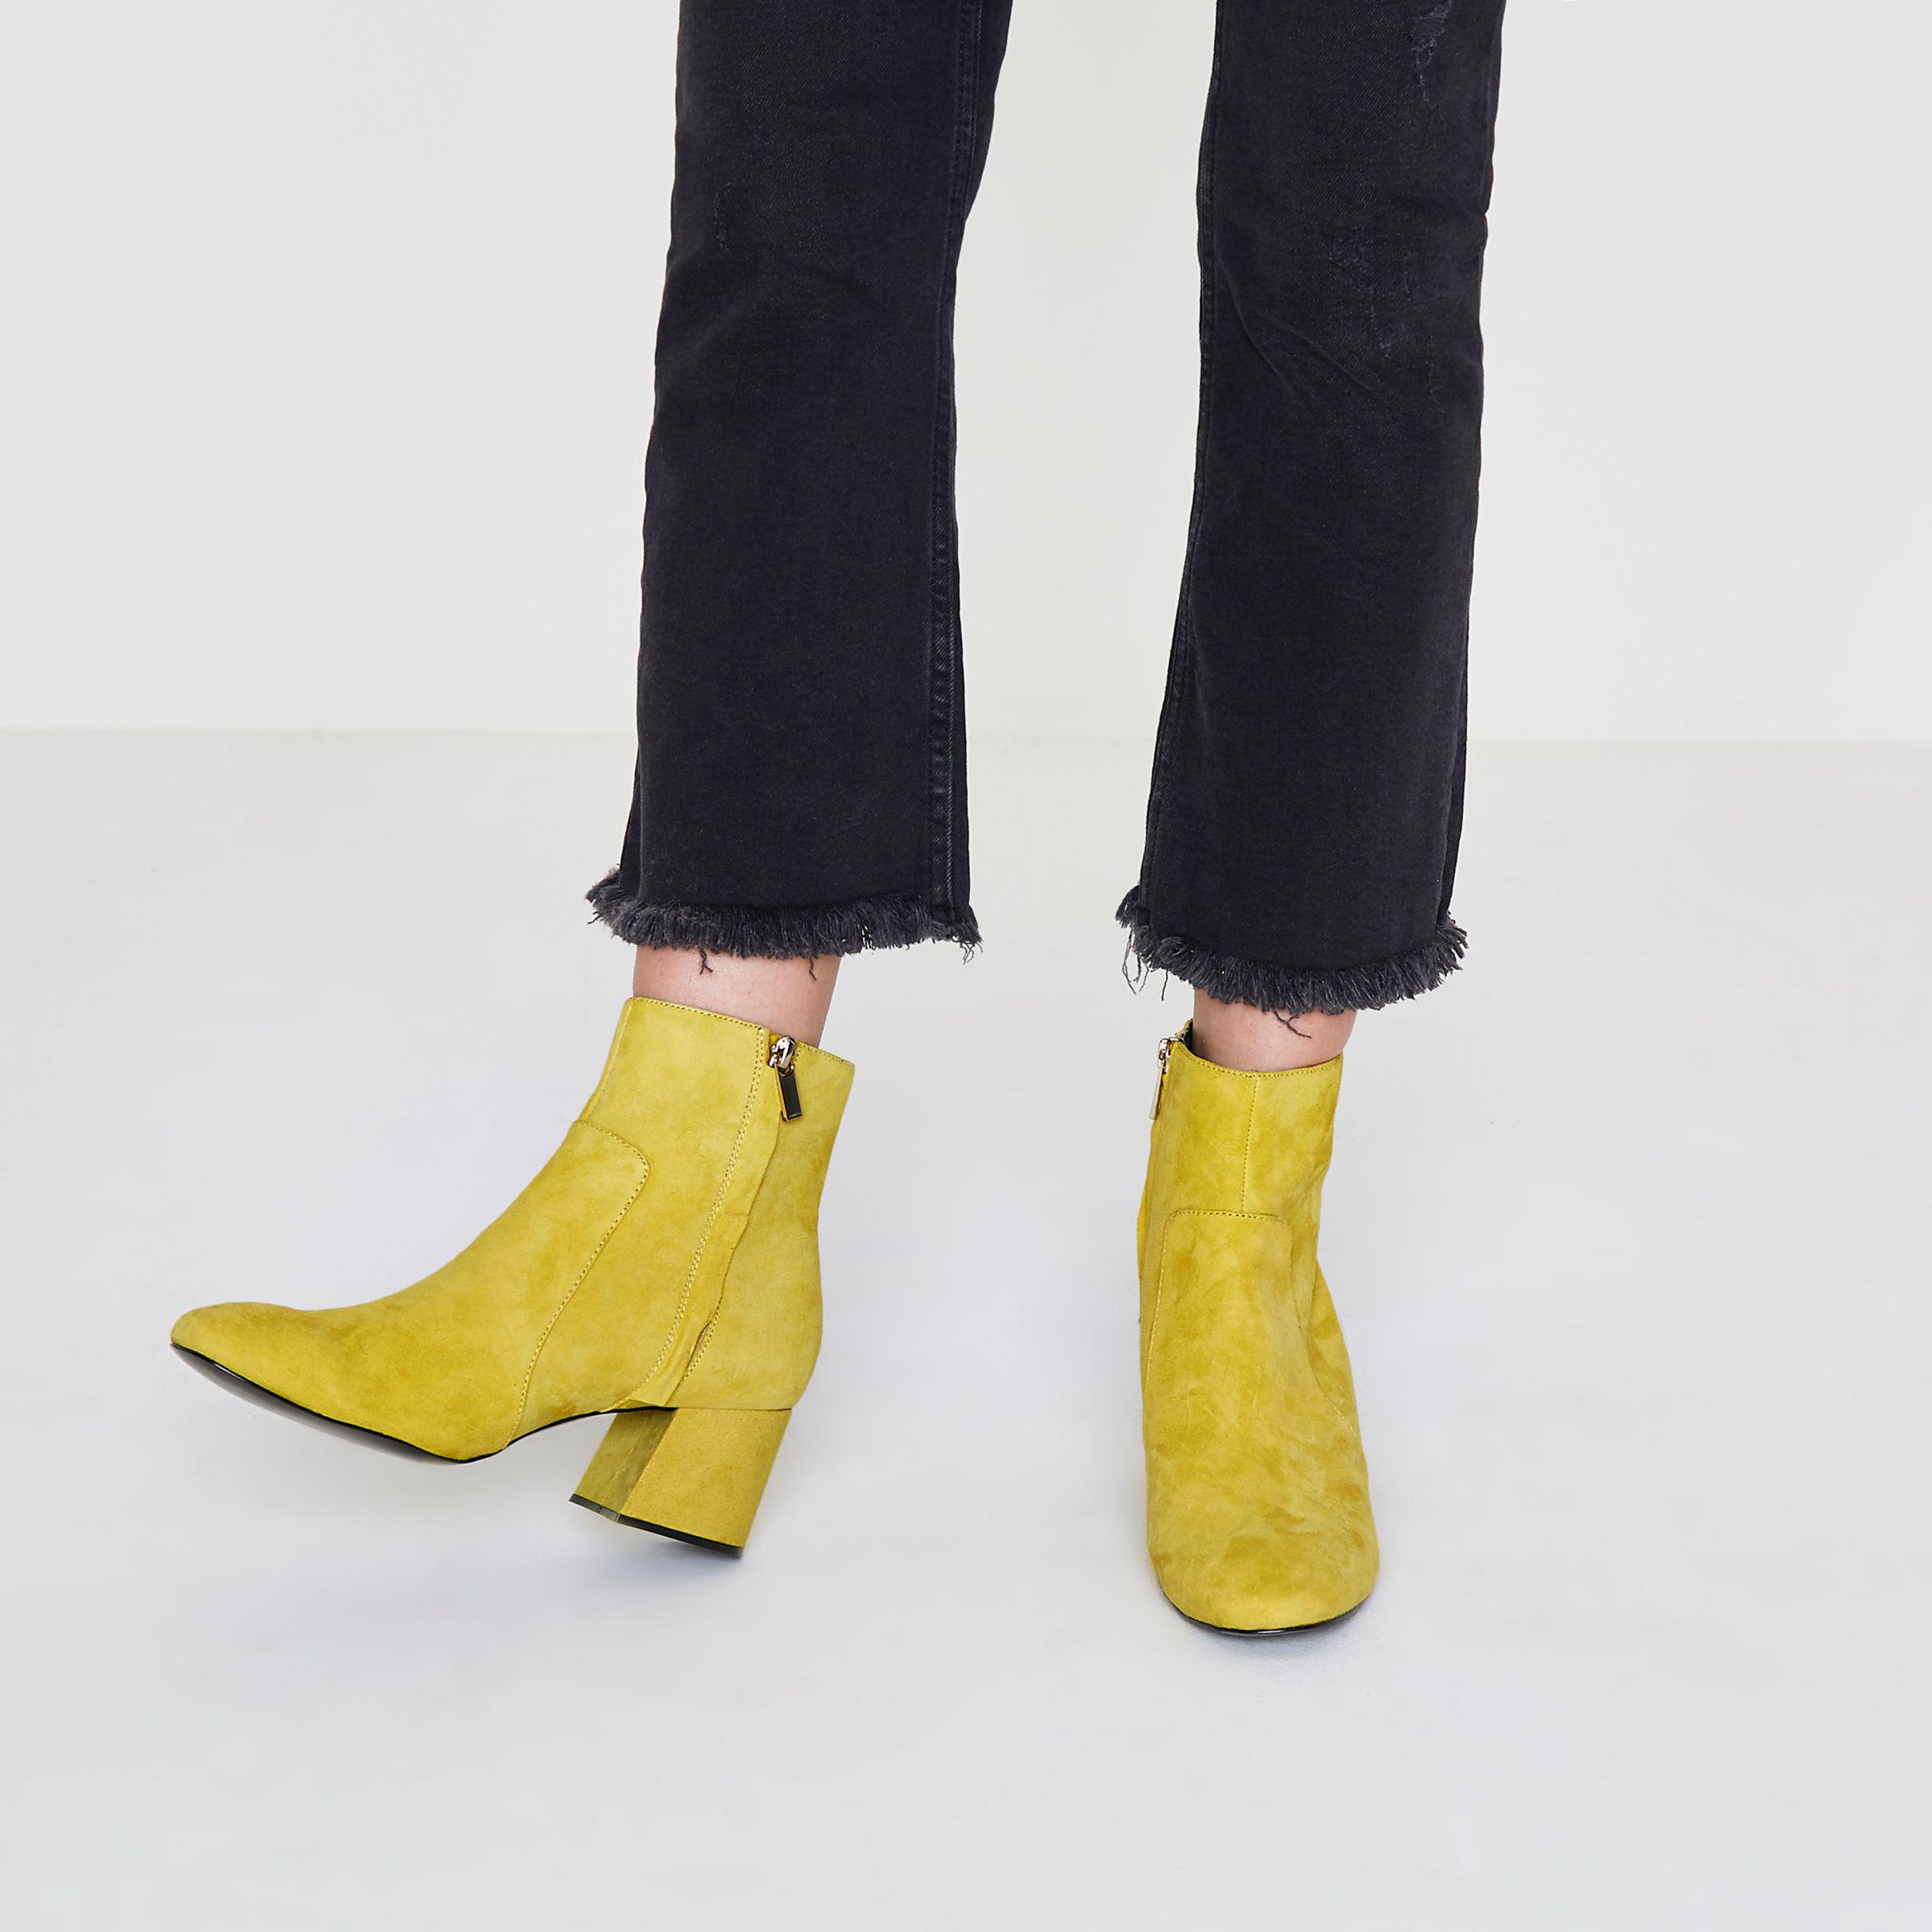 River Island Yellow Suede Block Heel Ankle Boots - Lyst